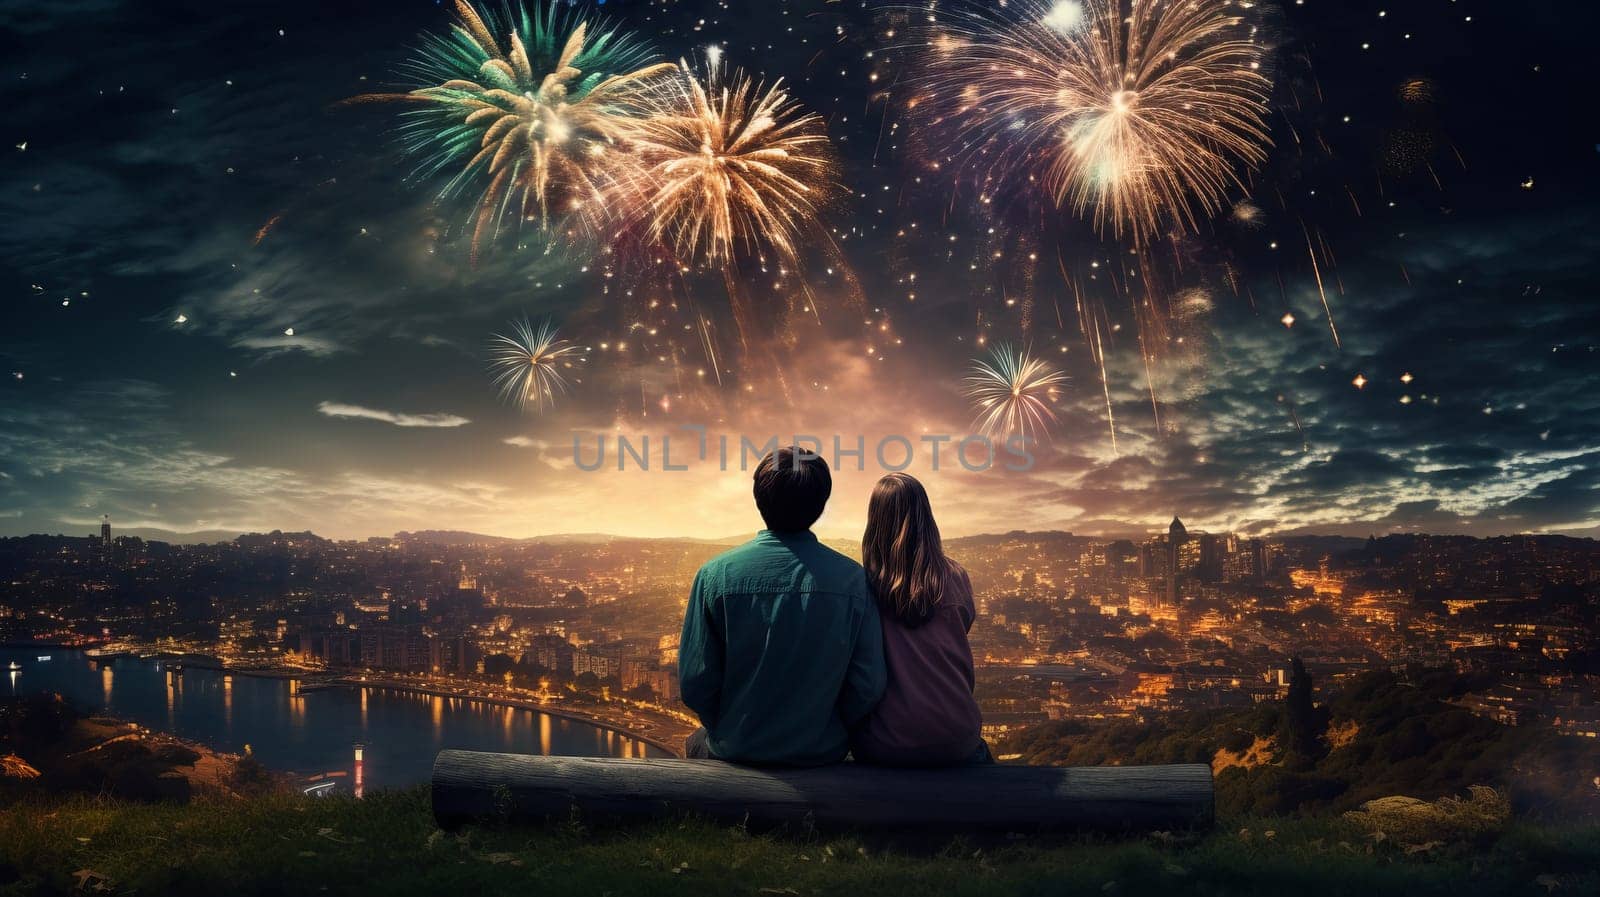 A couple enjoys a romantic and festive night on a bench, watching the colorful fireworks over the city skyline, celebrating Christmas and New Year. by DogDrawHand